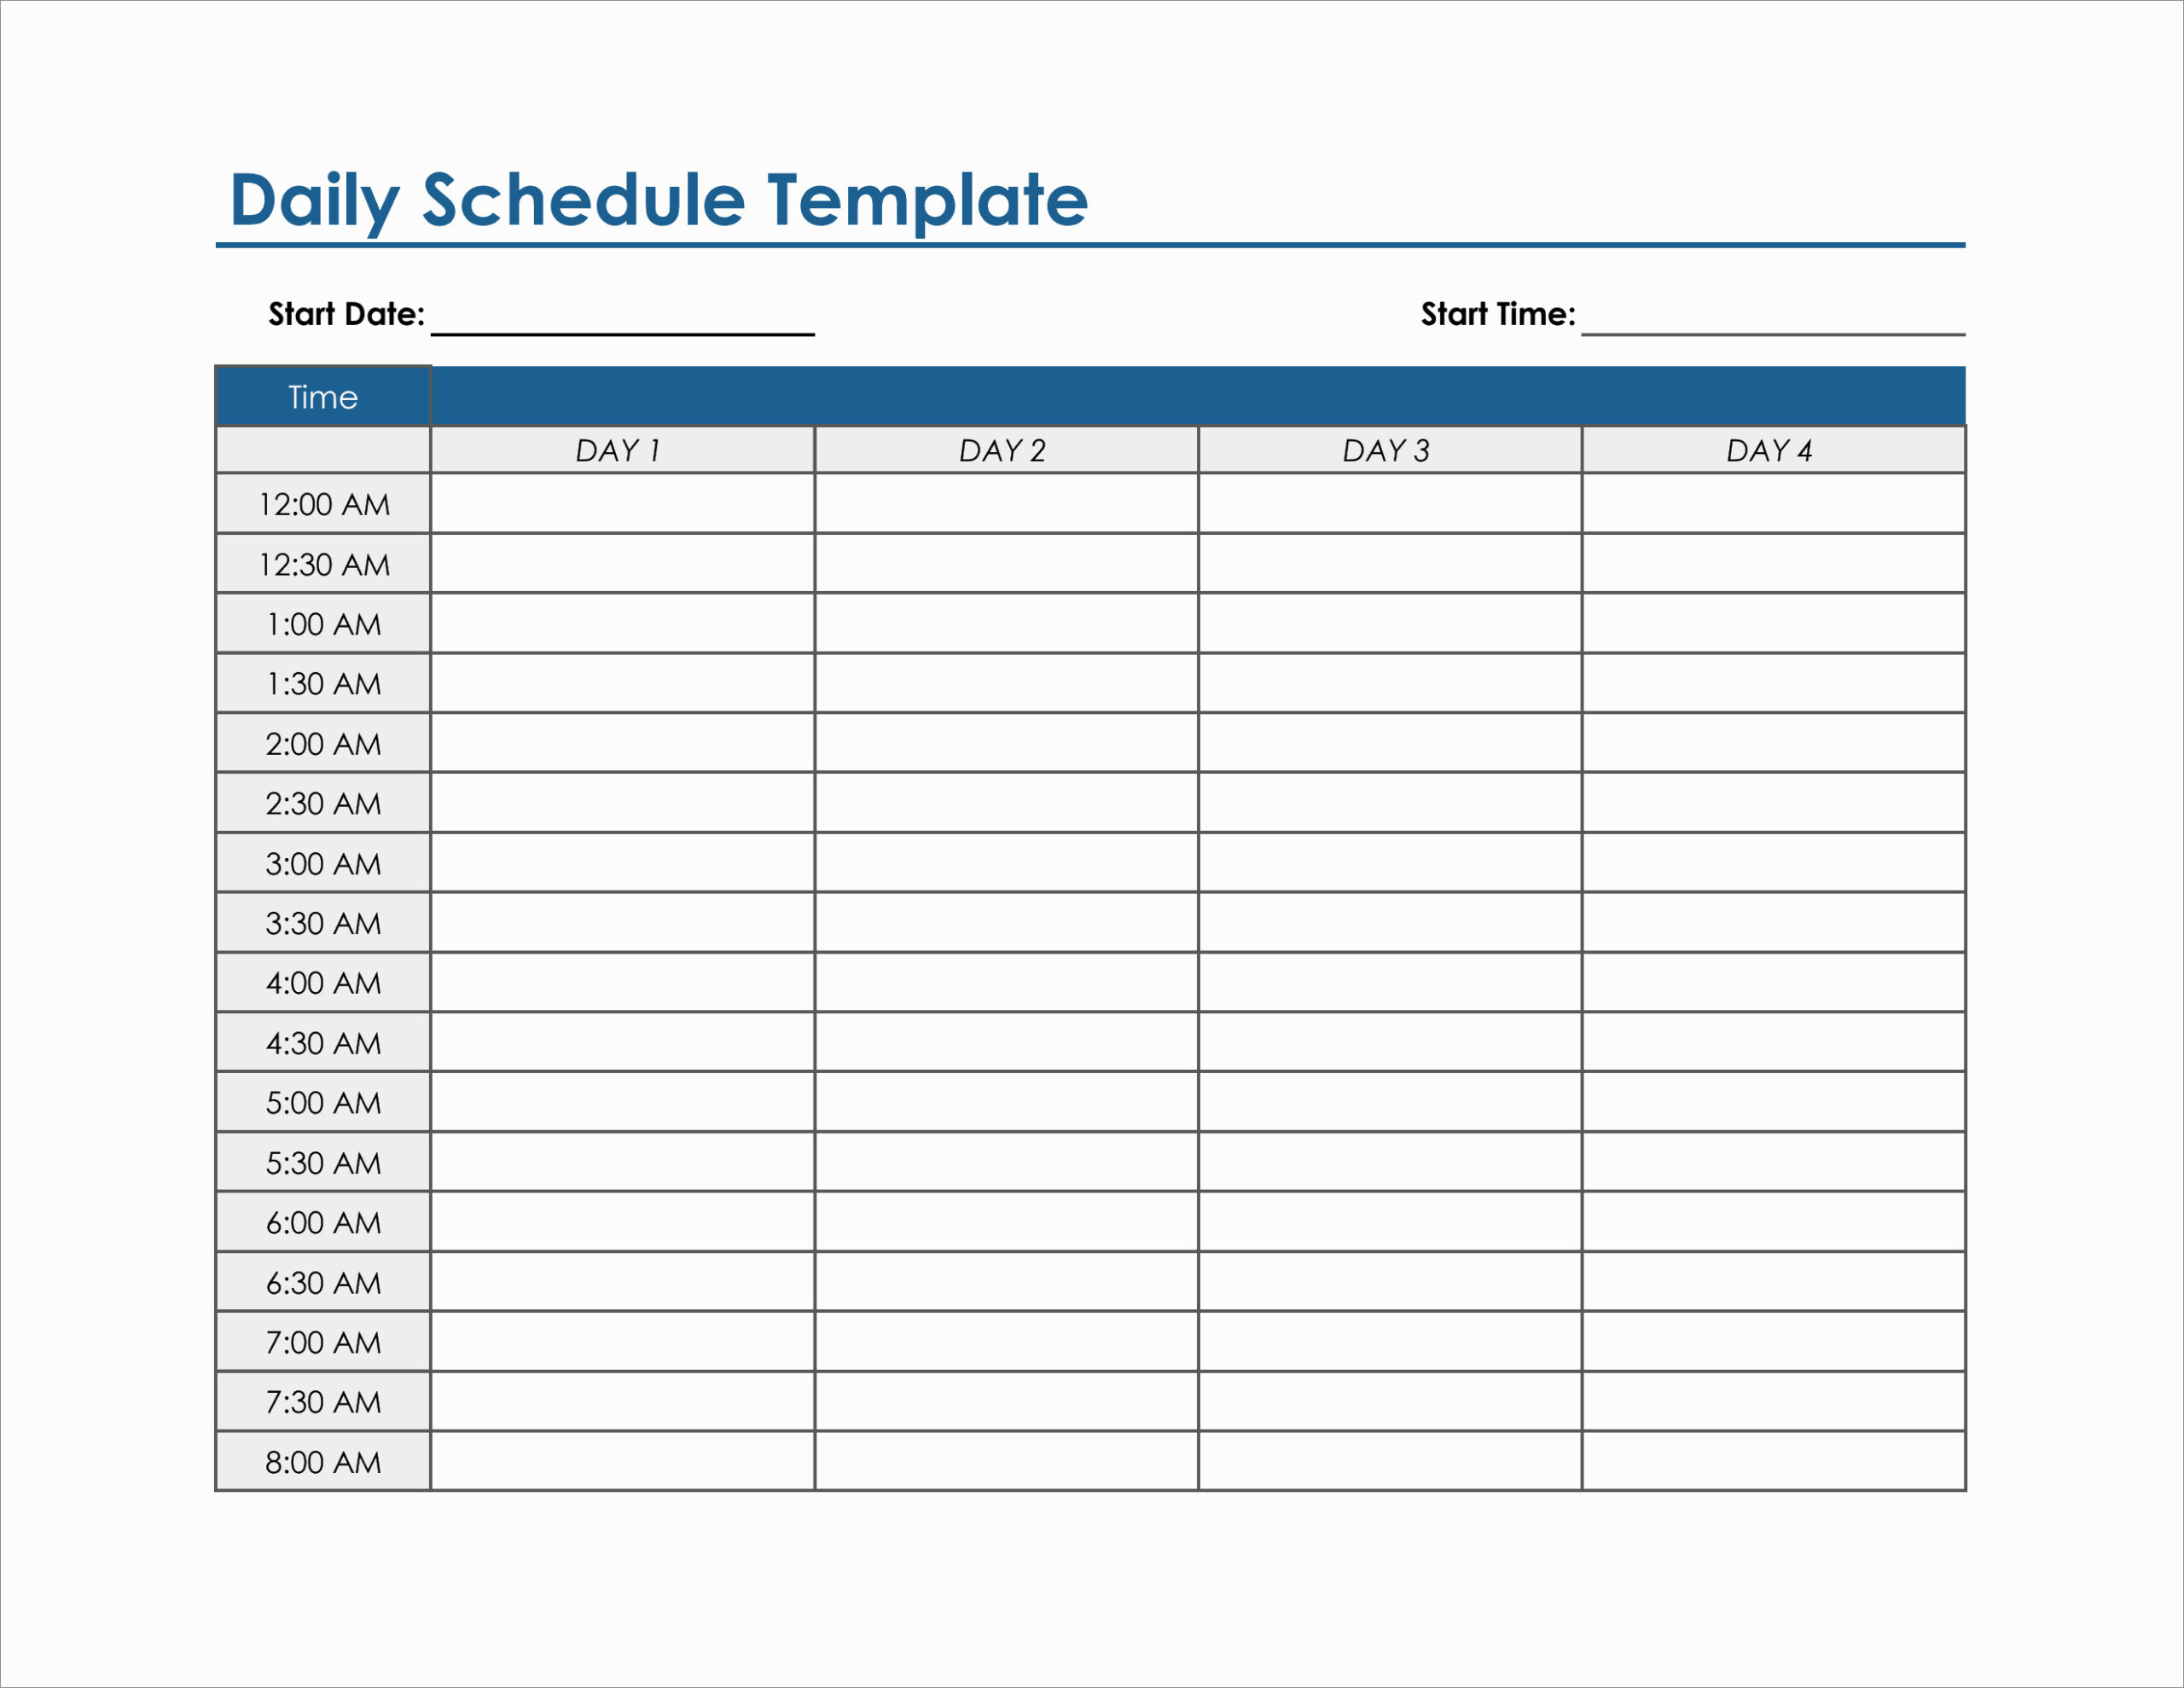 daily routine 24-hour schedule template example